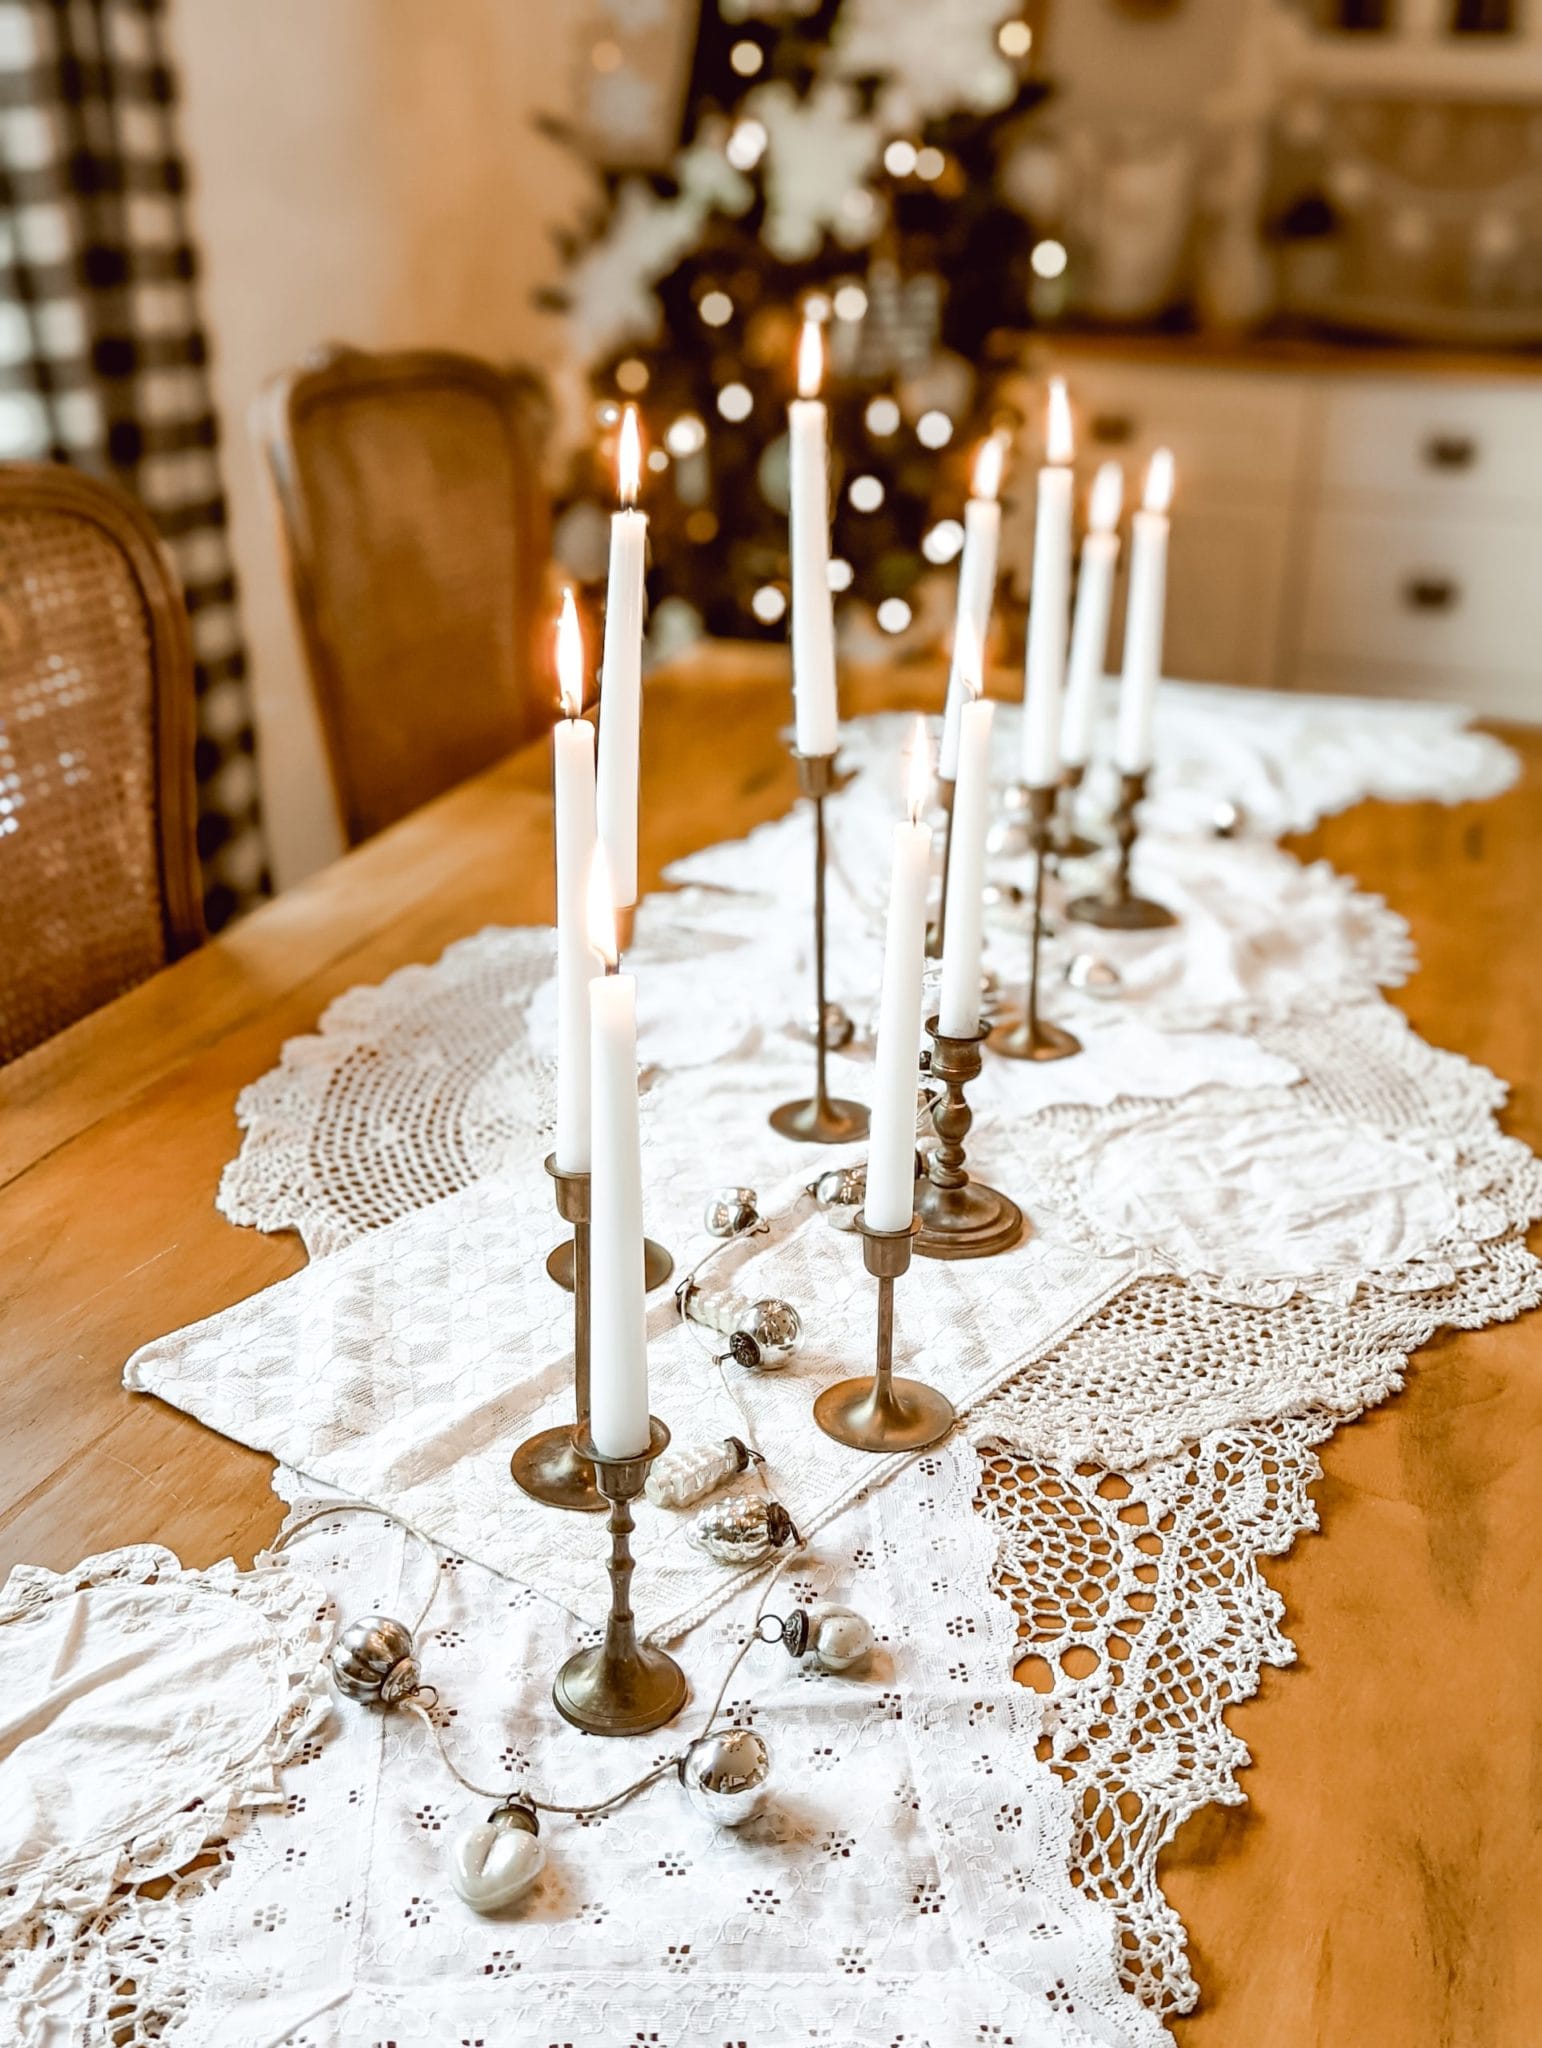 How to Make a Vintage Doily Table Runner